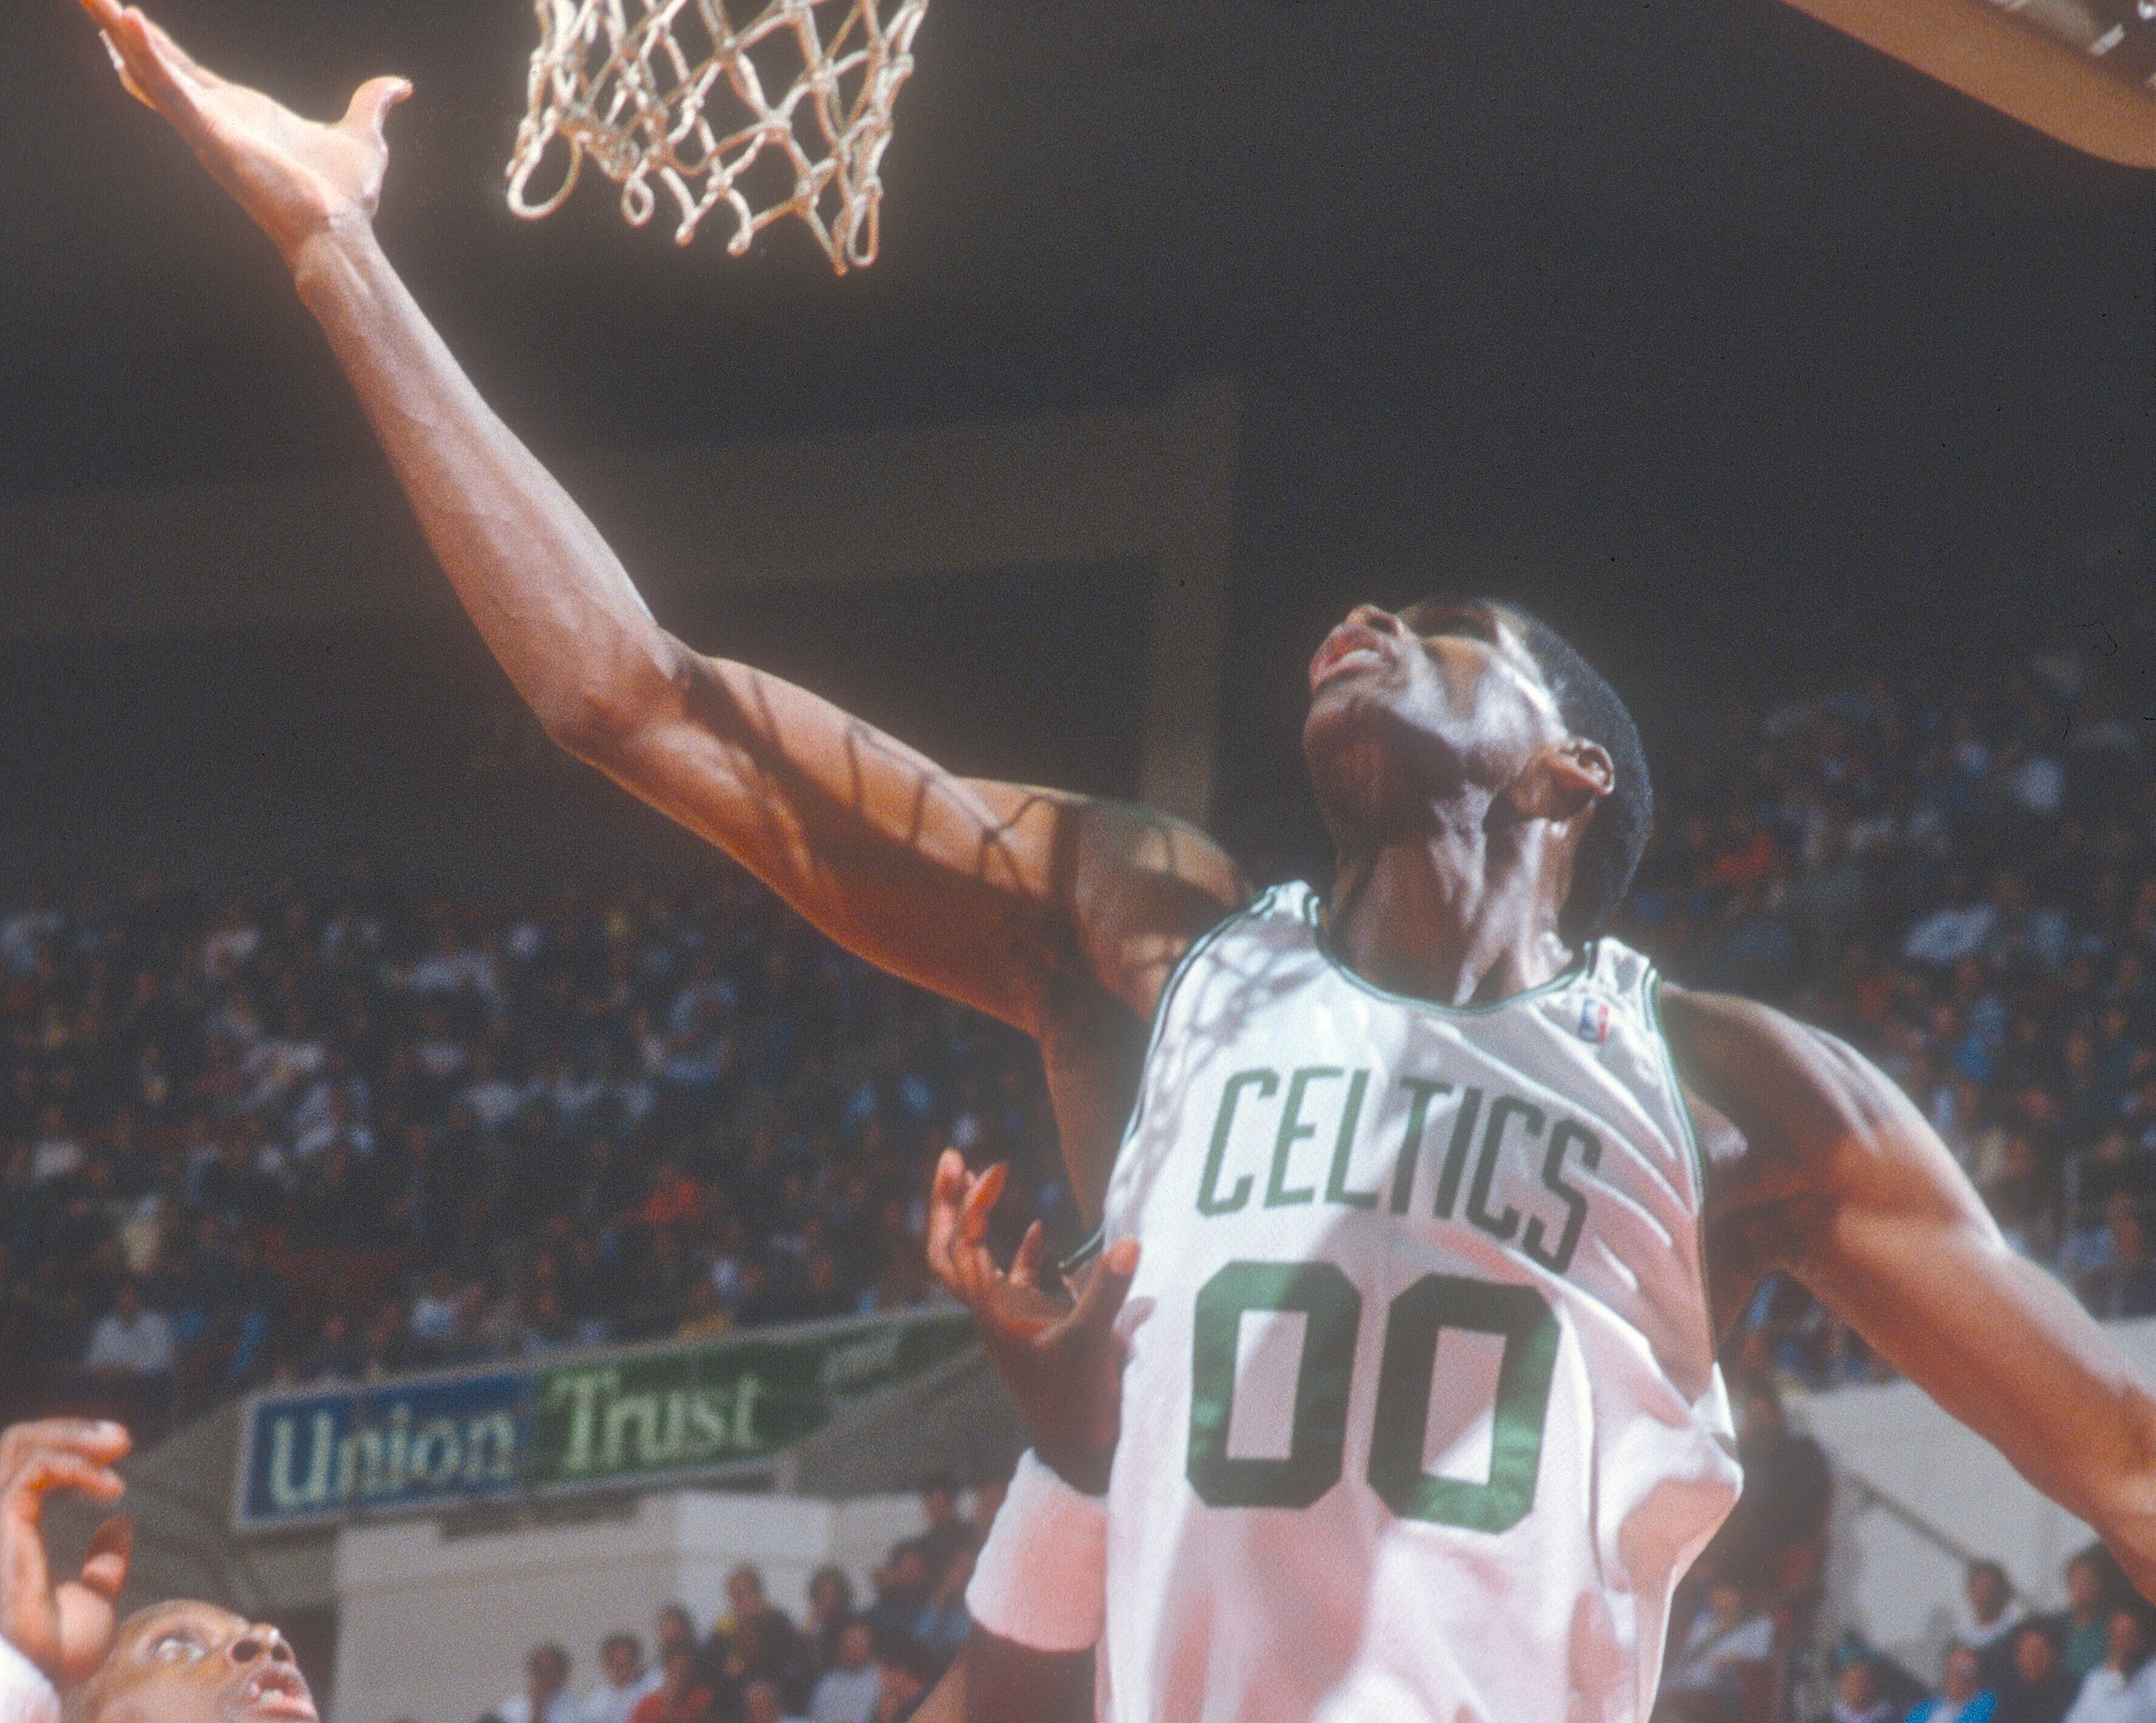 Robert Parish of the Boston Celtics in action against the Phoenix Suns during an NBA basketball game circa 1991.